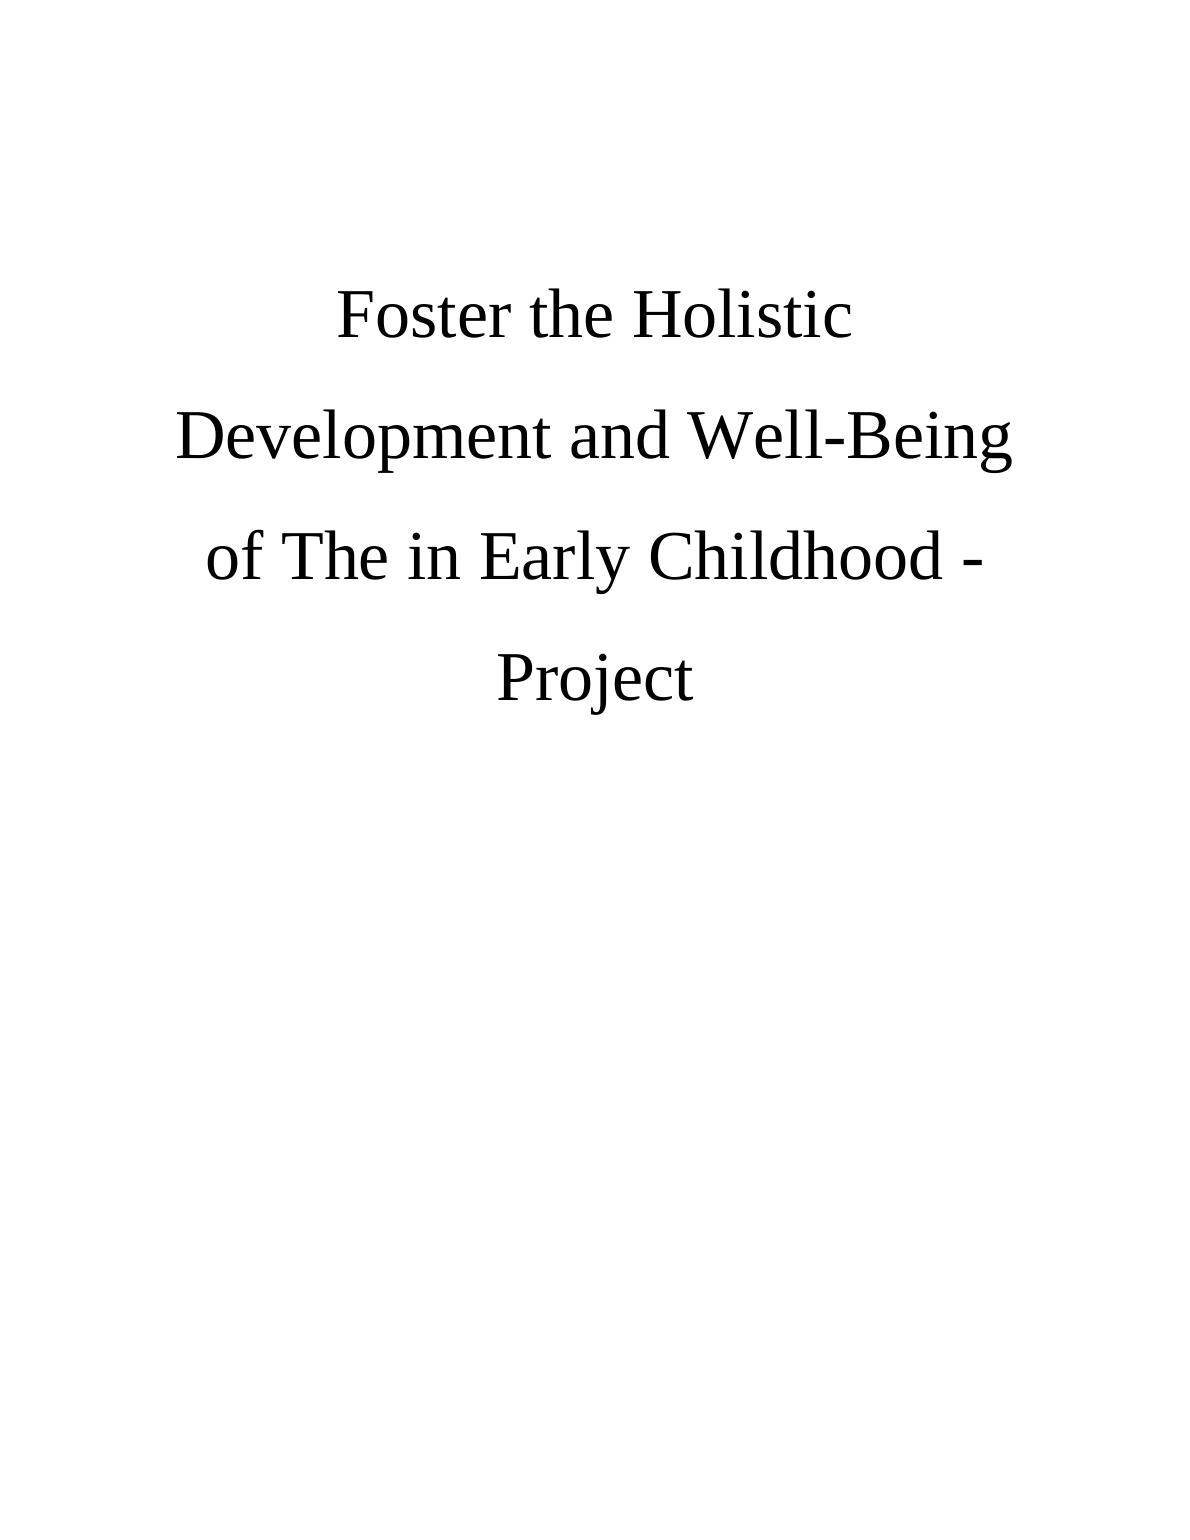 Foster the Holistic Development and Well-Being of The in Early Childhood Project_1